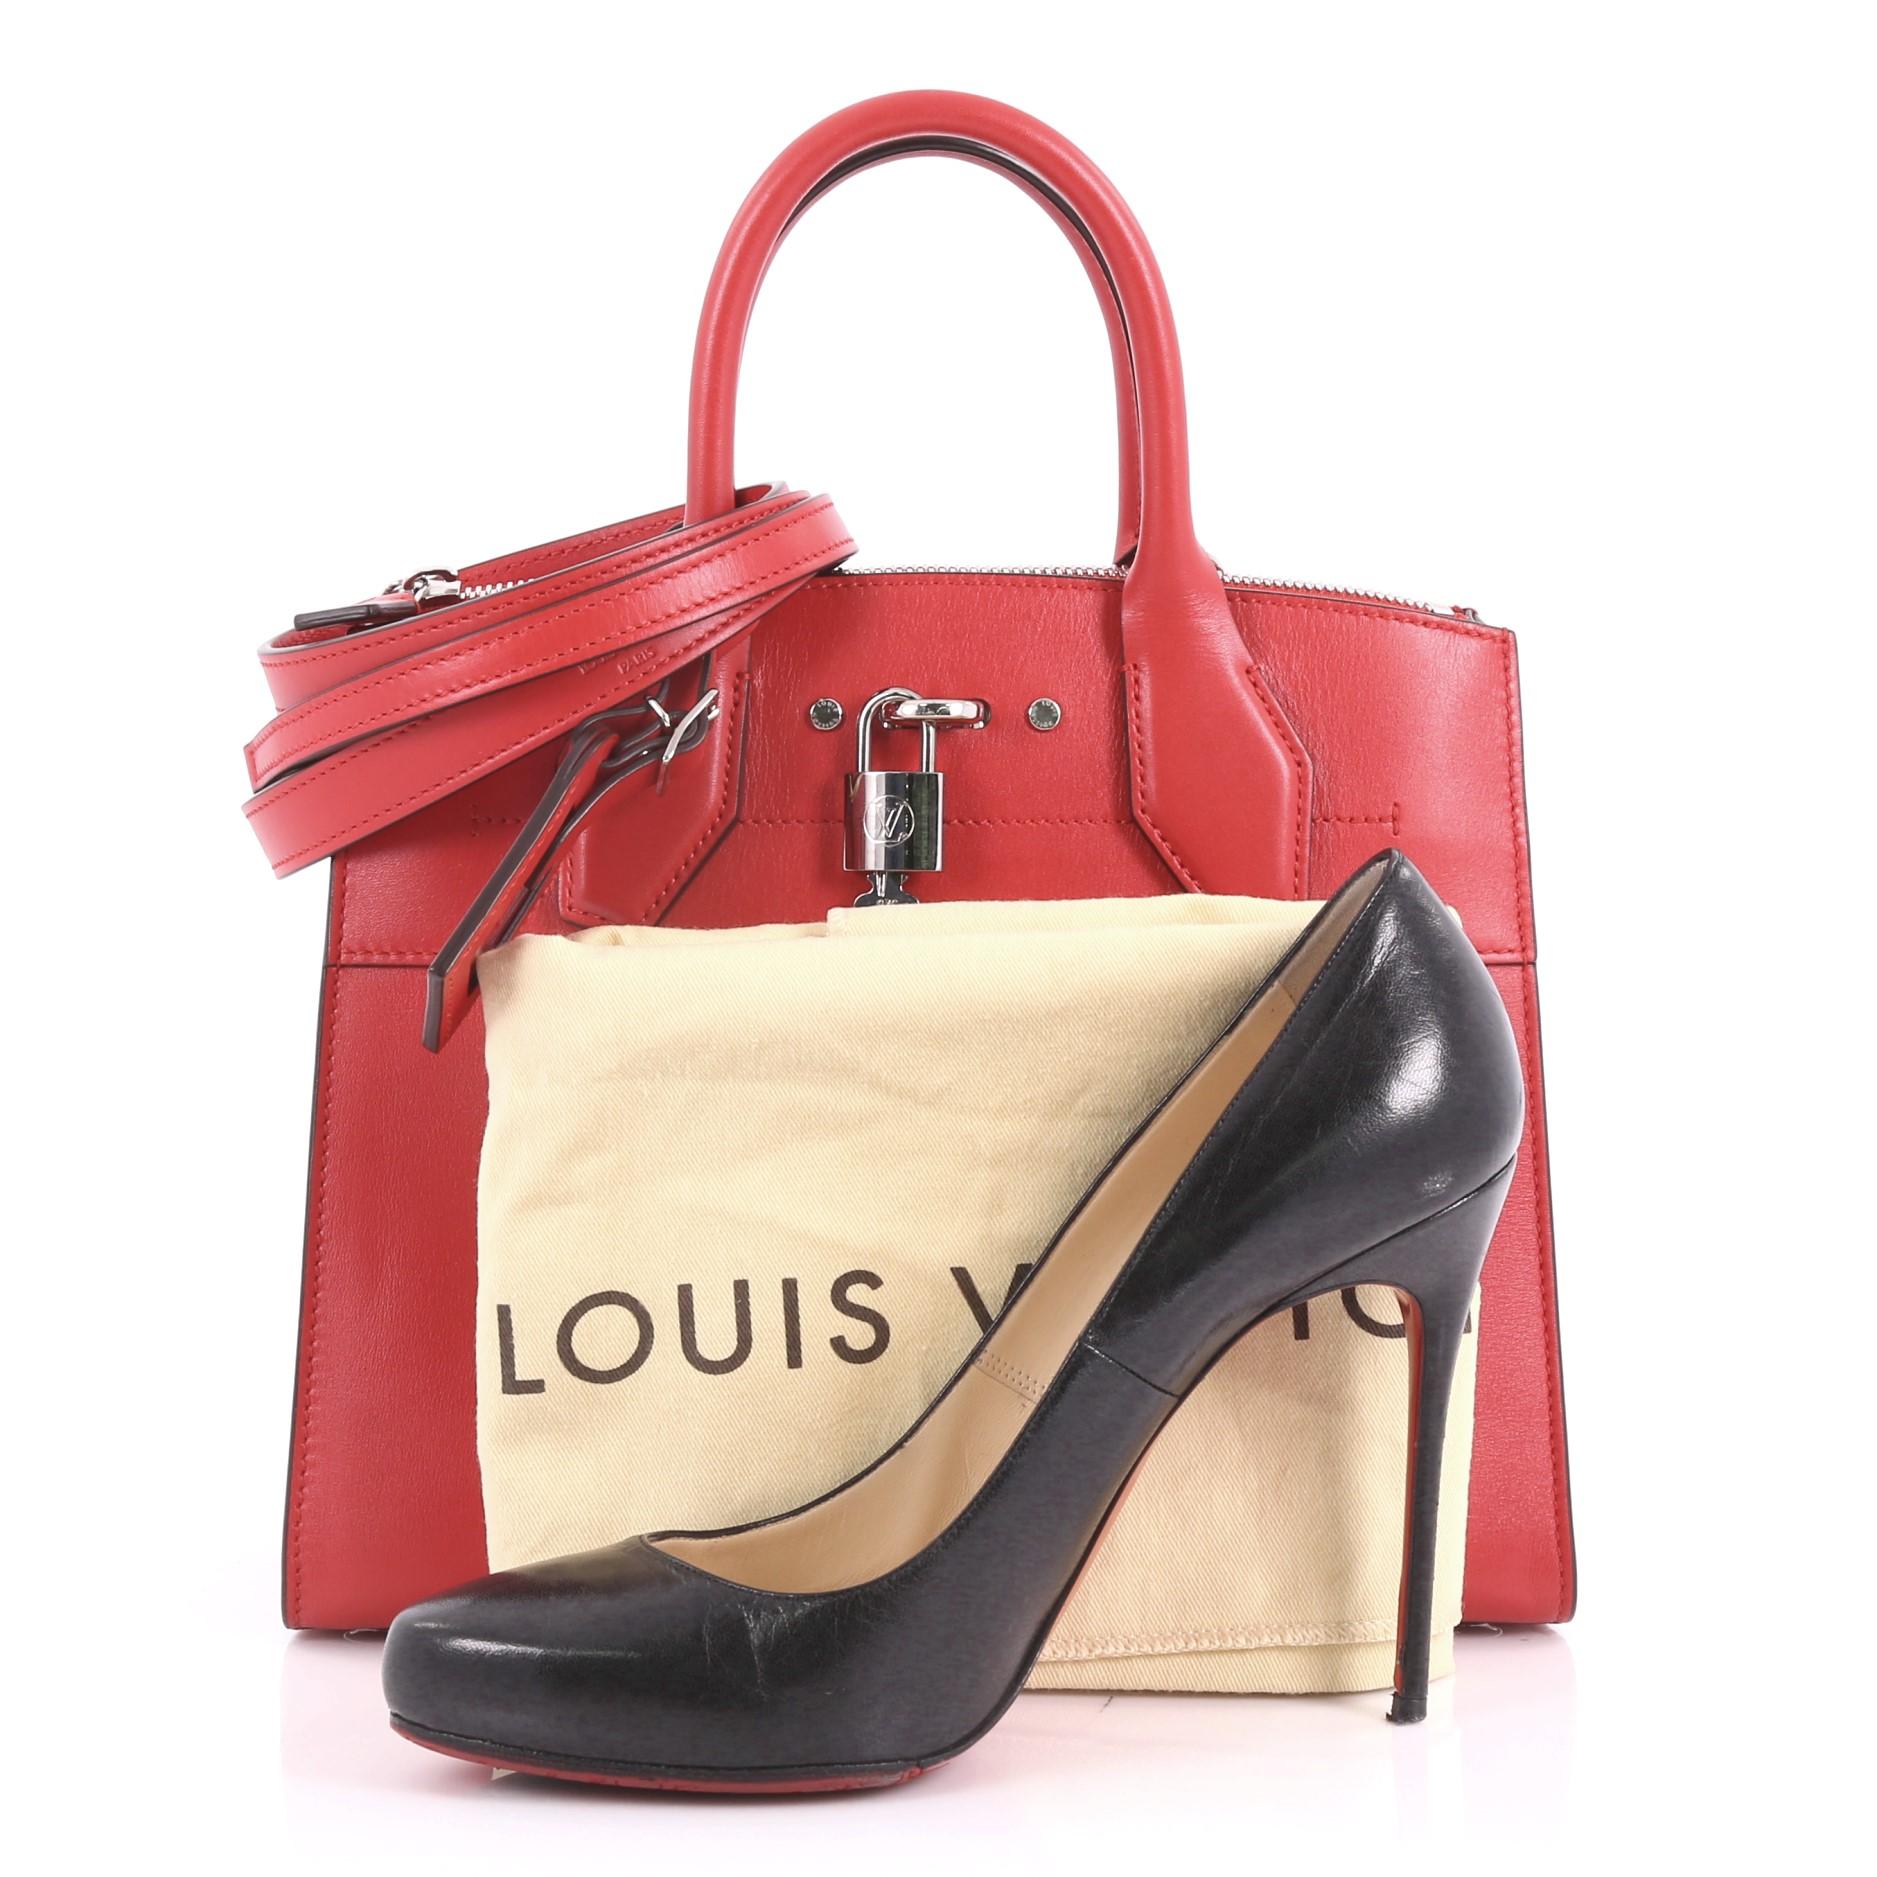 This Louis Vuitton City Steamer Handbag Leather PM, crafted in red calfskin leather, features dual rolled leather handles, front central lock, and silver-tone hardware. It opens to a red leather interior with rear zip compartment and slip pockets.